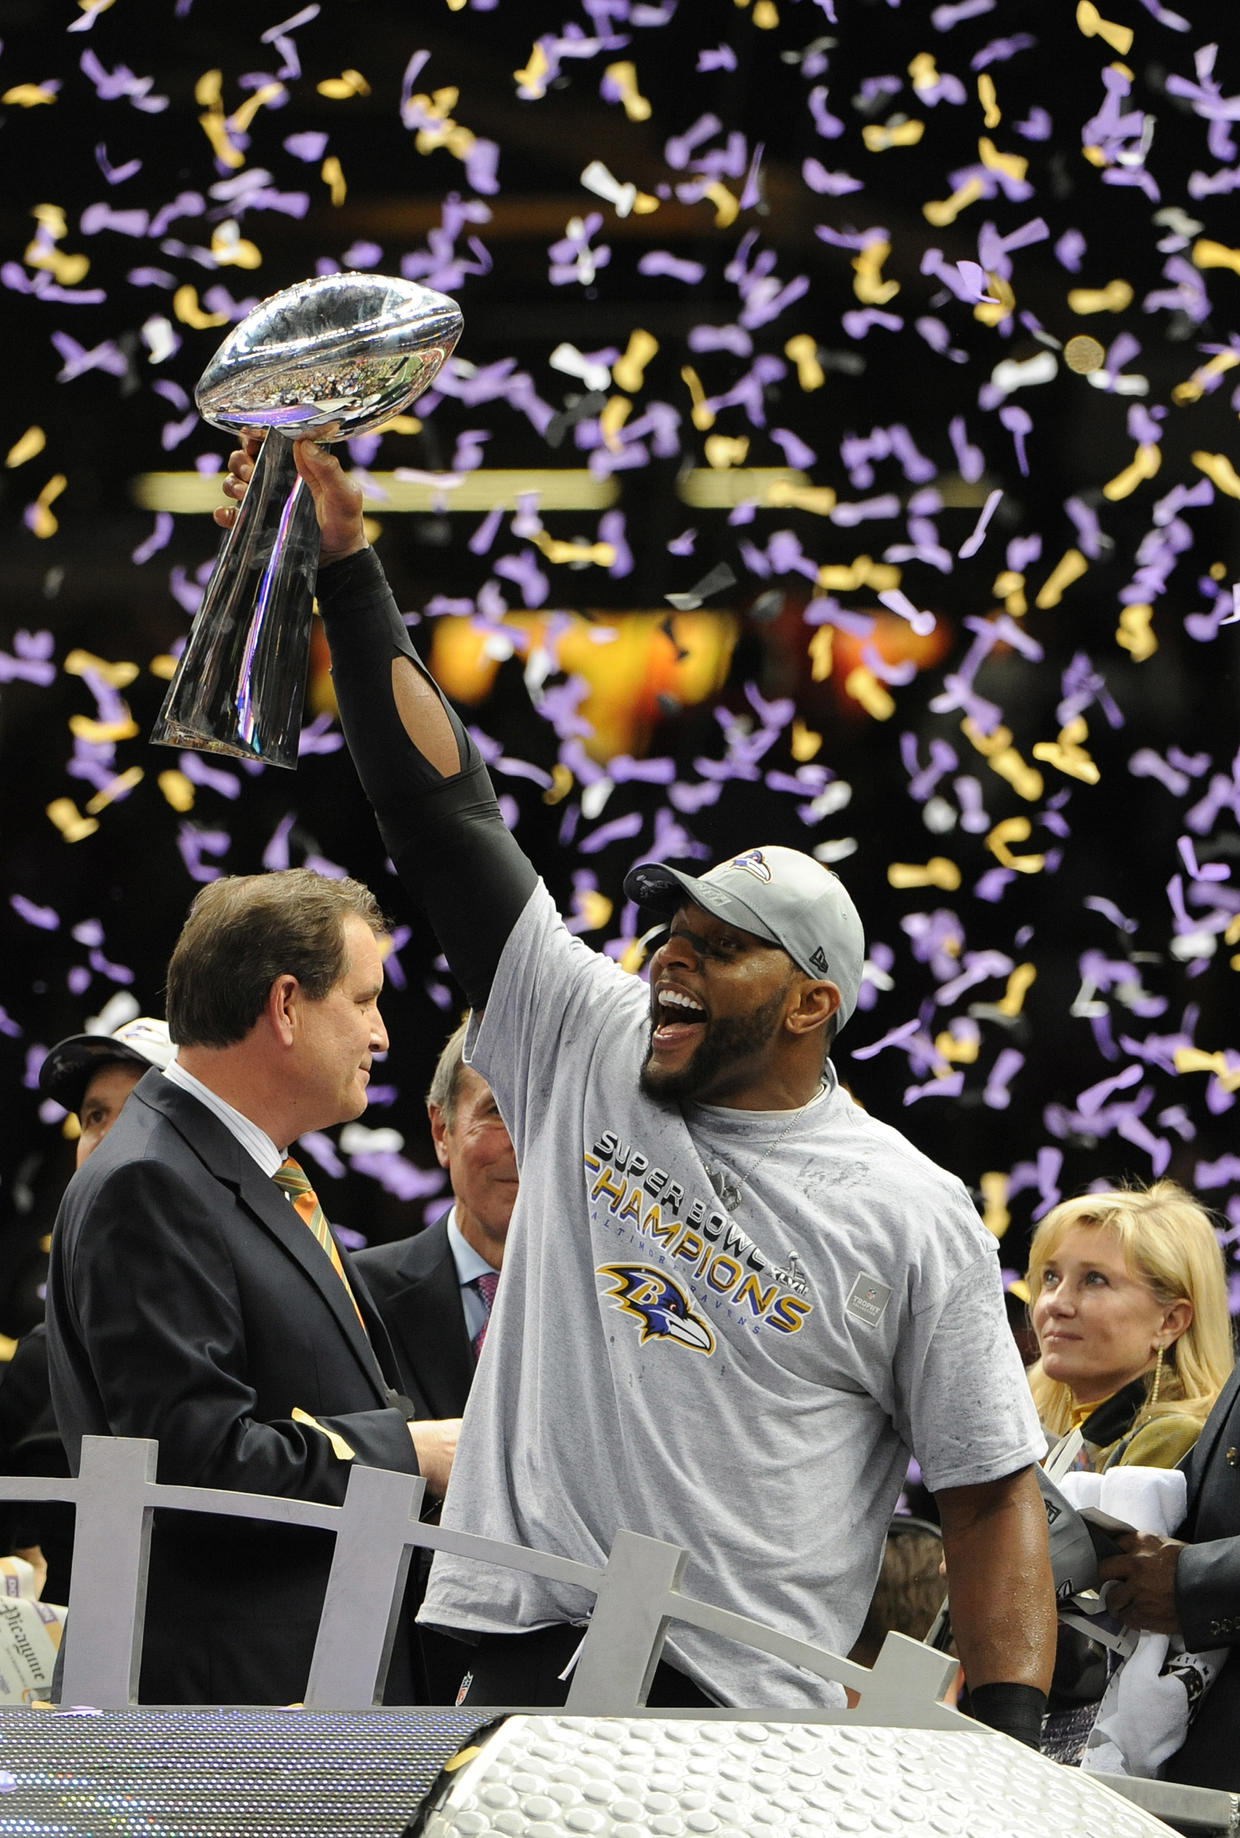 PHOTOS: Looking Back On The Ravens' Win At Super Bowl 47